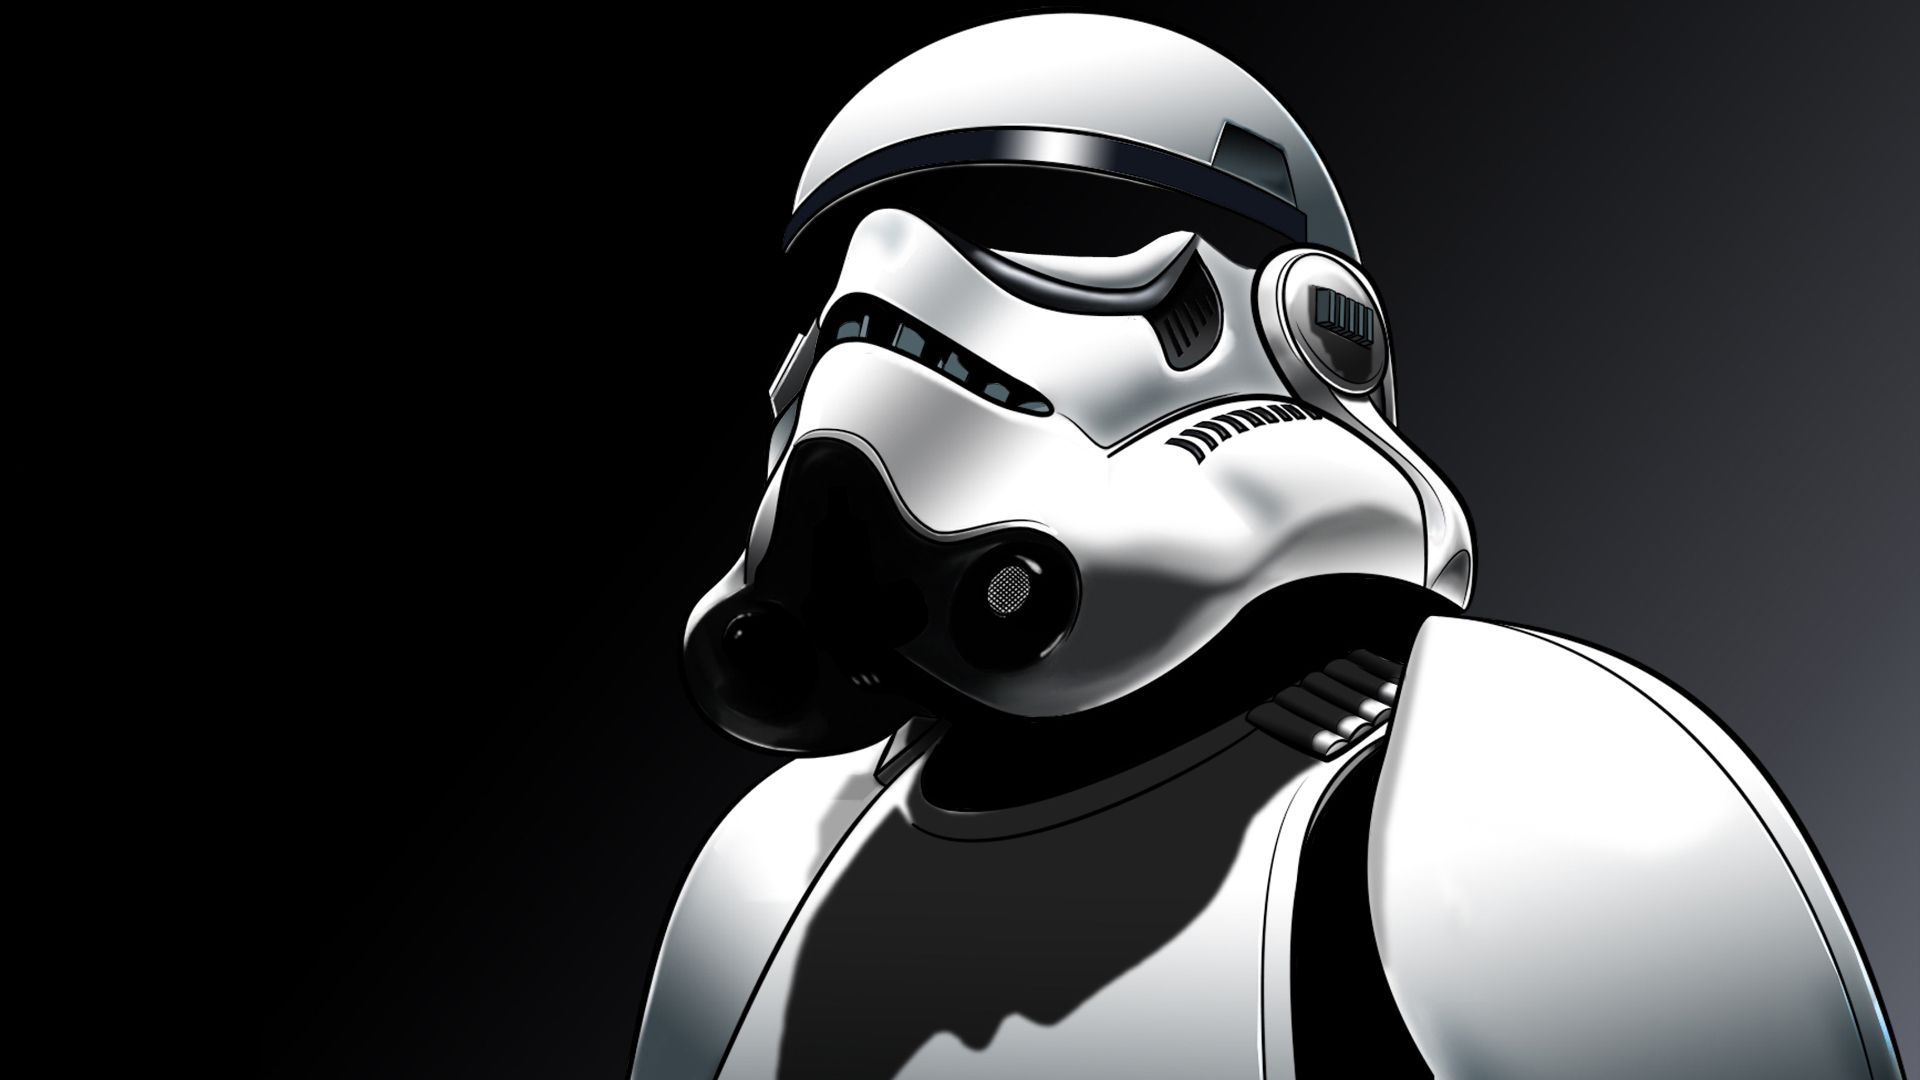 1920x1080px Black and White Wallpaper Star Wars